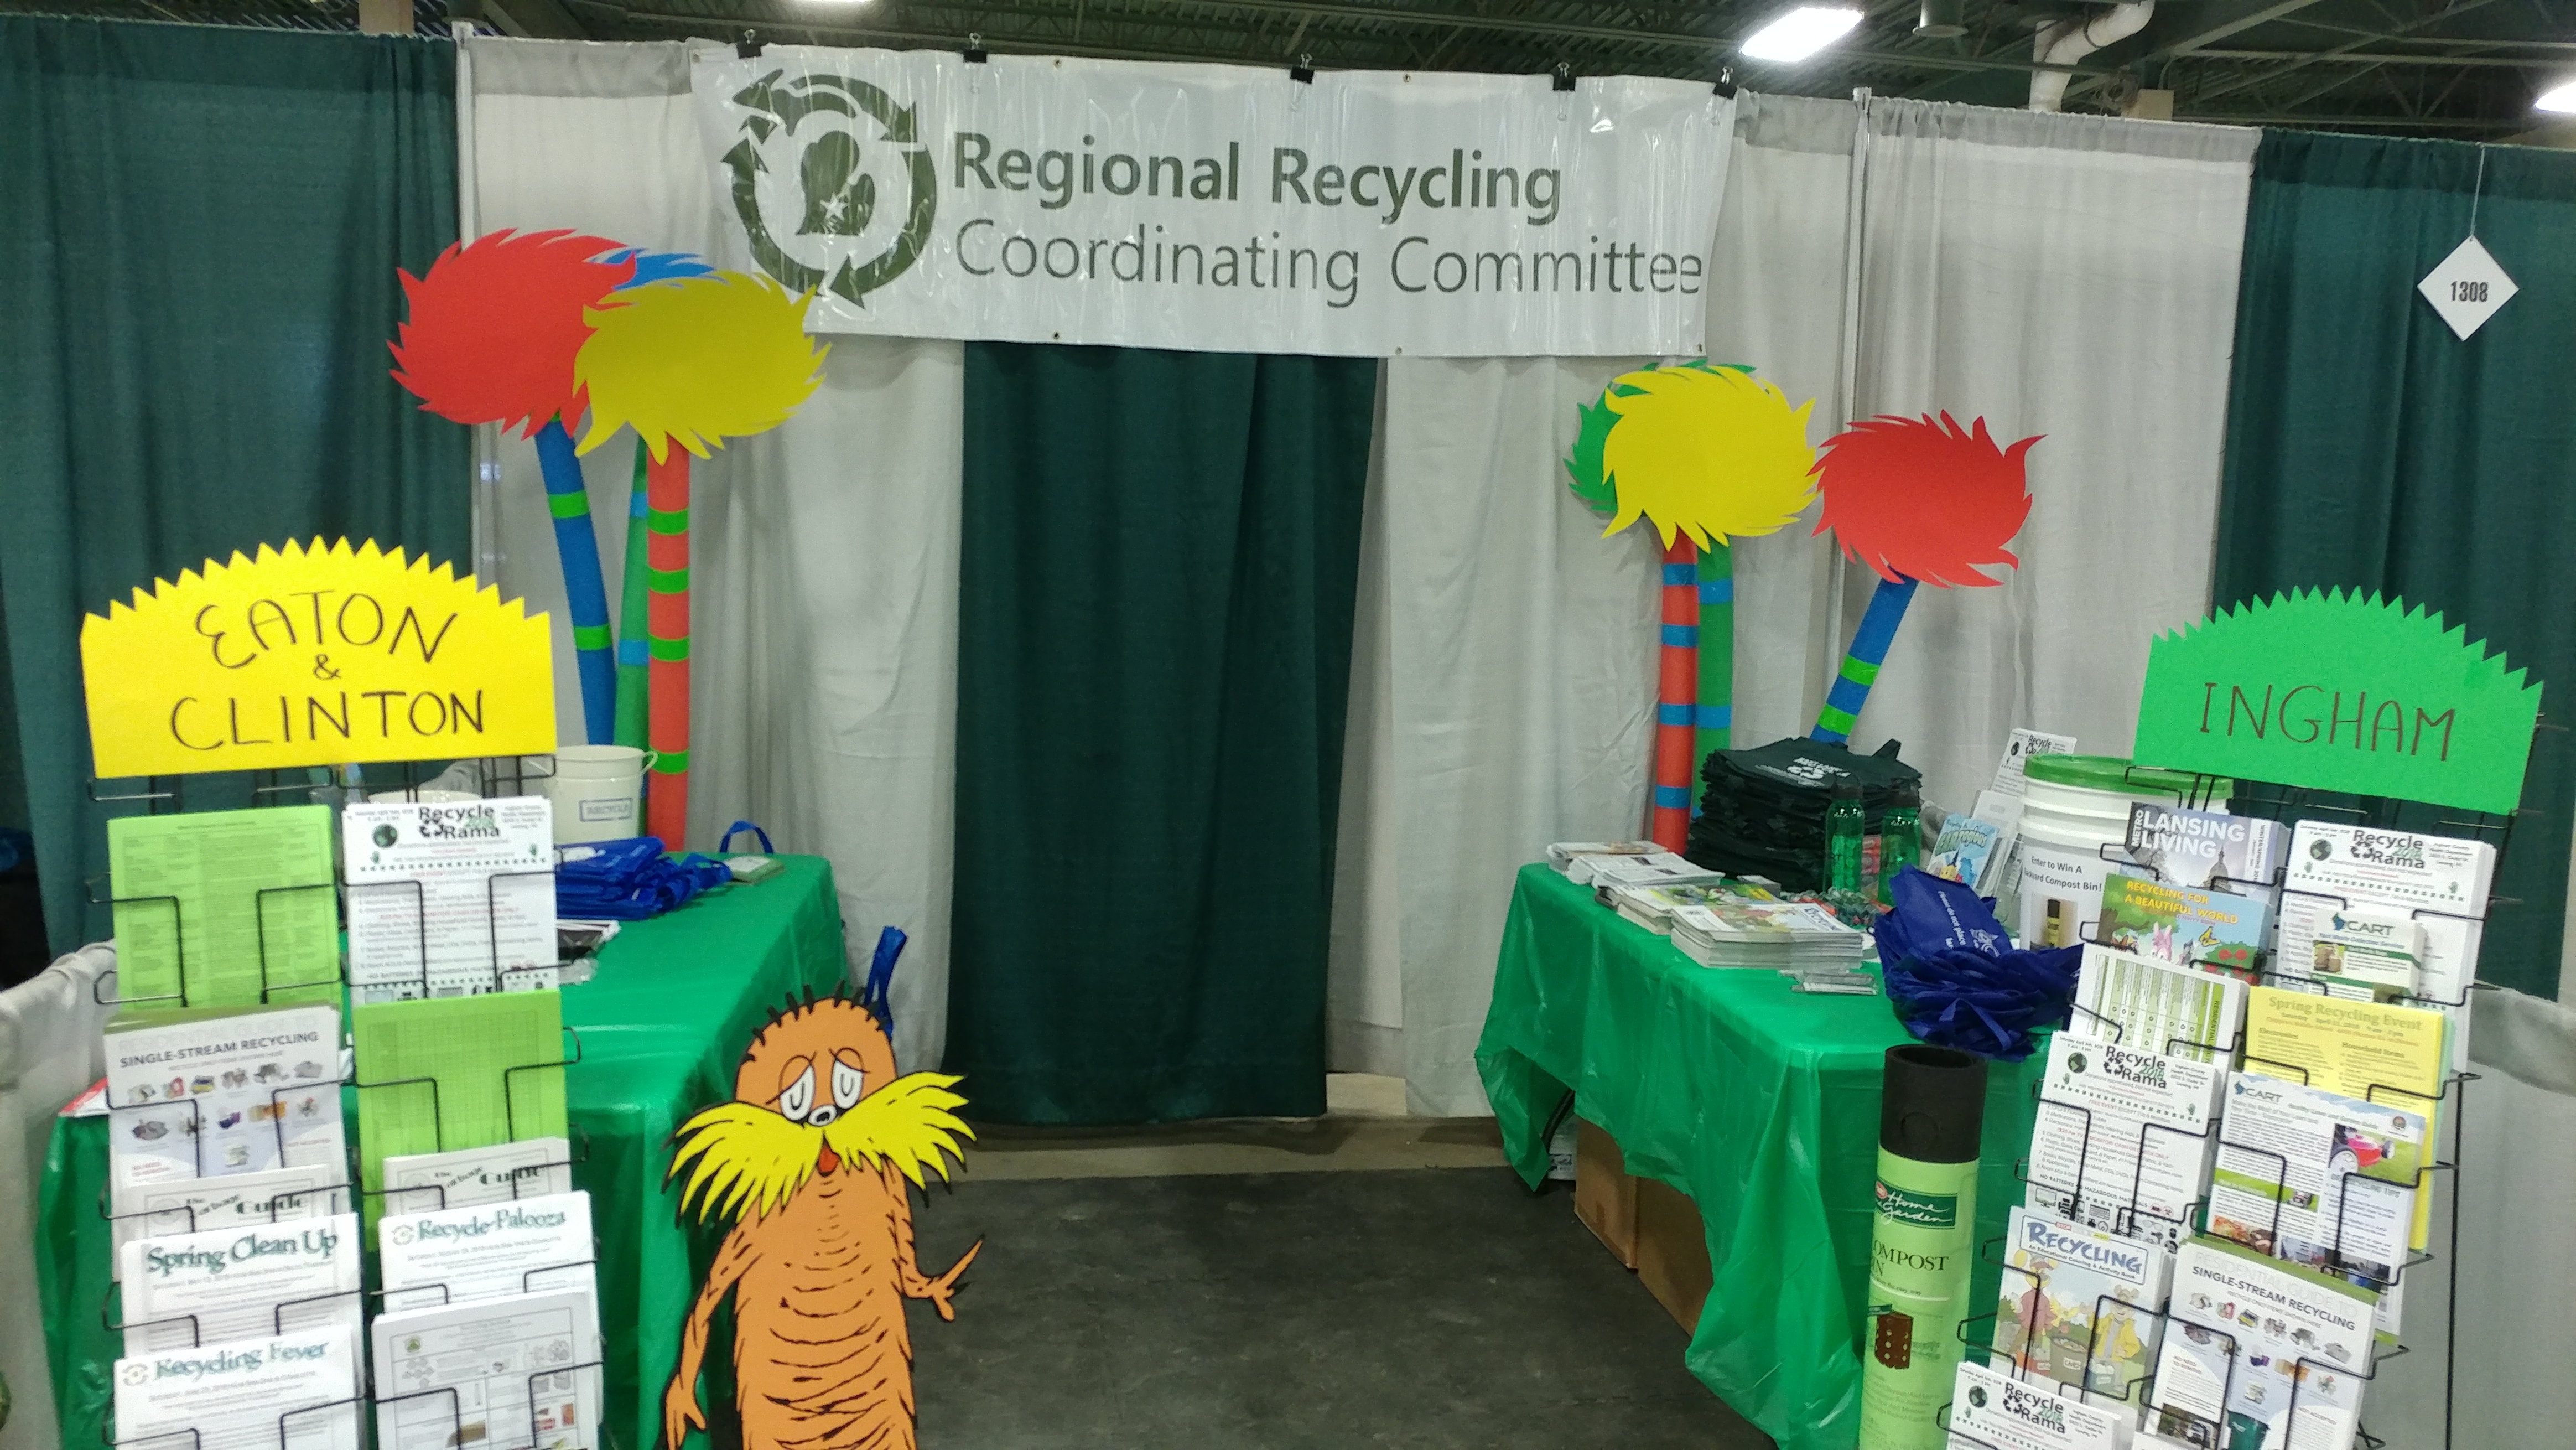 Regional Recycling Coordinating Committee booth with Lorax theme